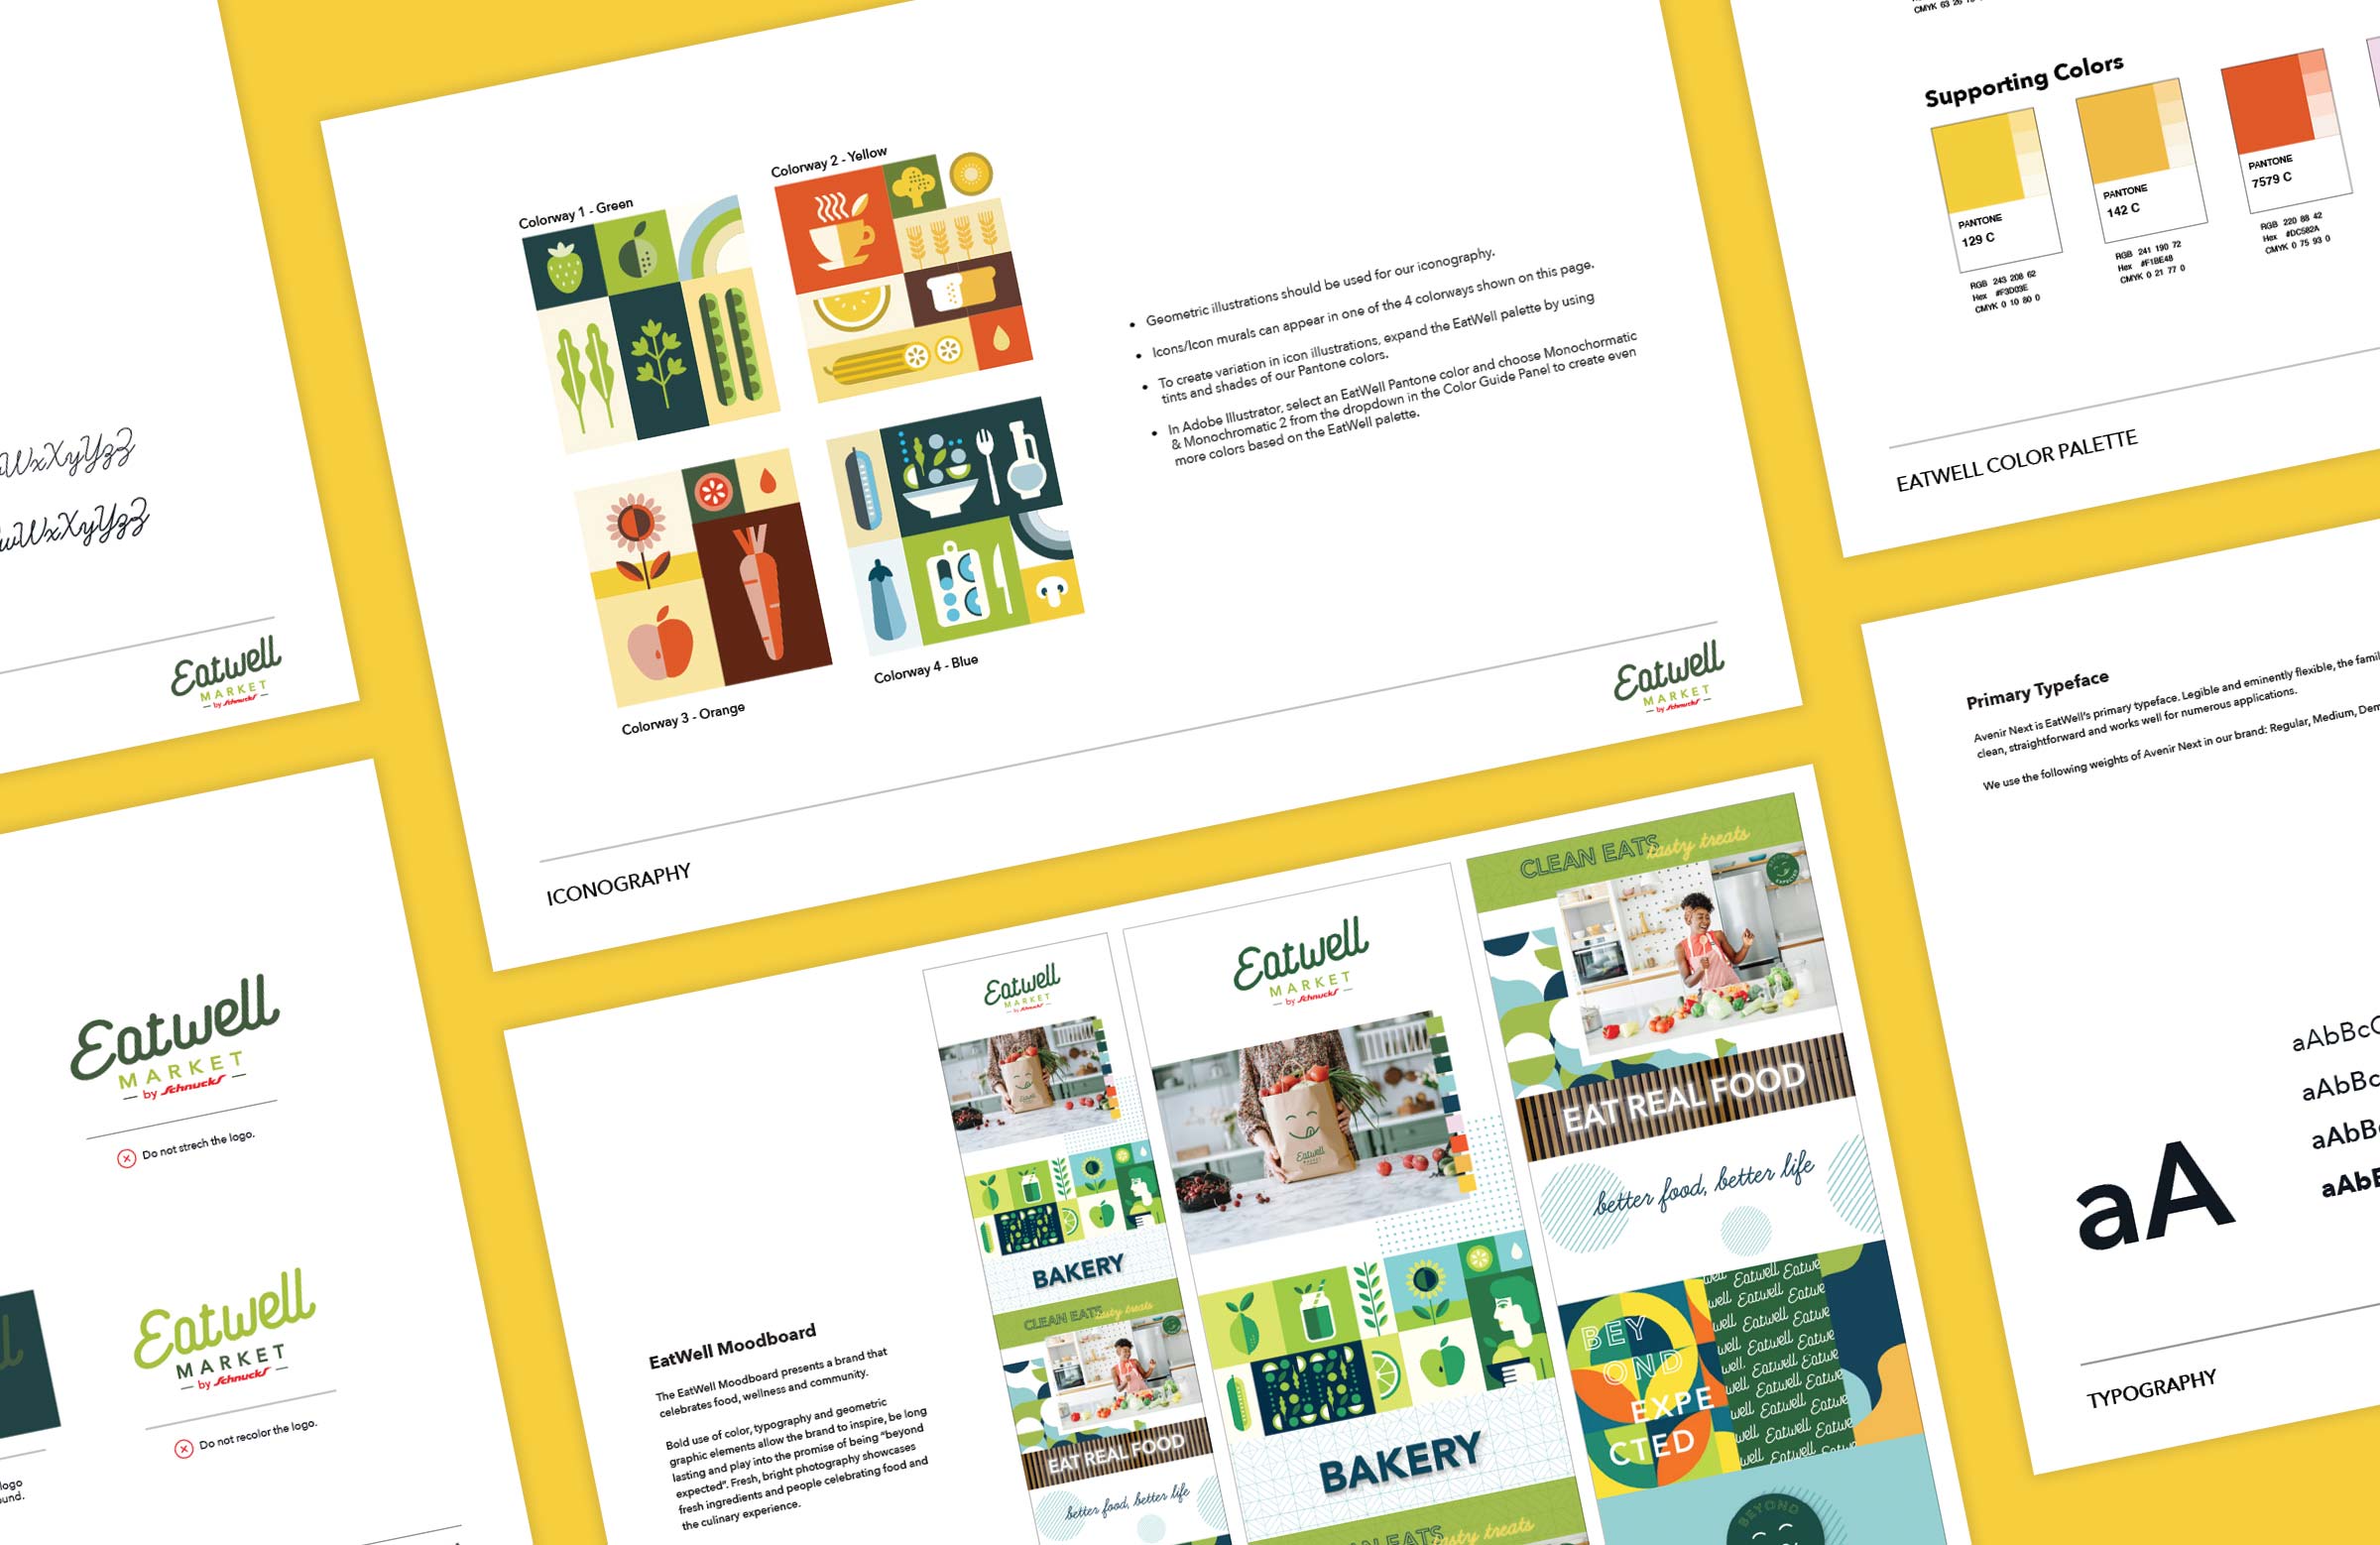 Pages from the Eatwell grocery store brand guidelines